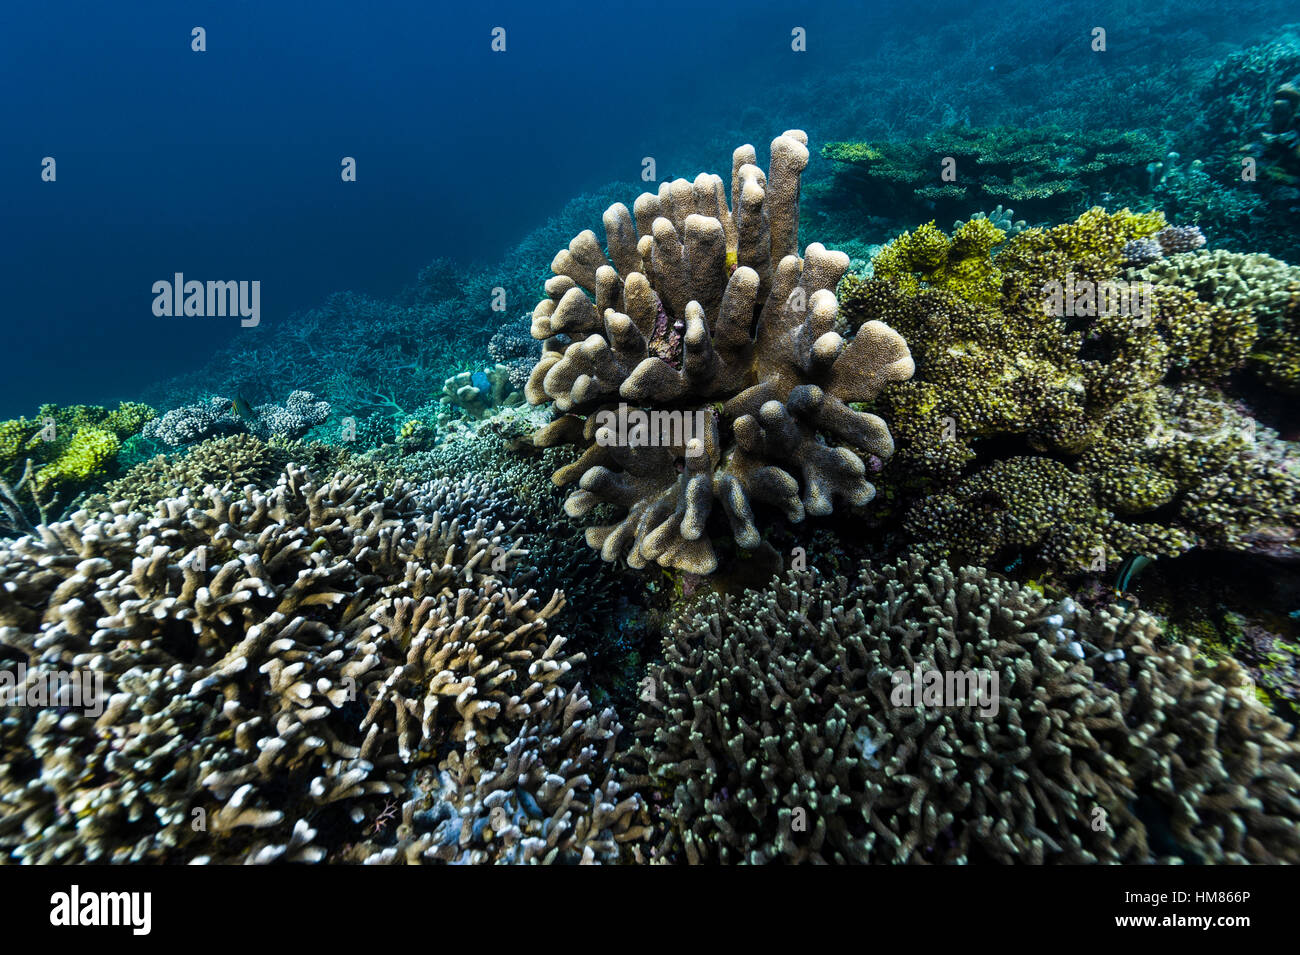 A colony of Pavona Cactus Coralï¾ and stony coral growing on a reef on top of a volcanic lava flow. Stock Photo